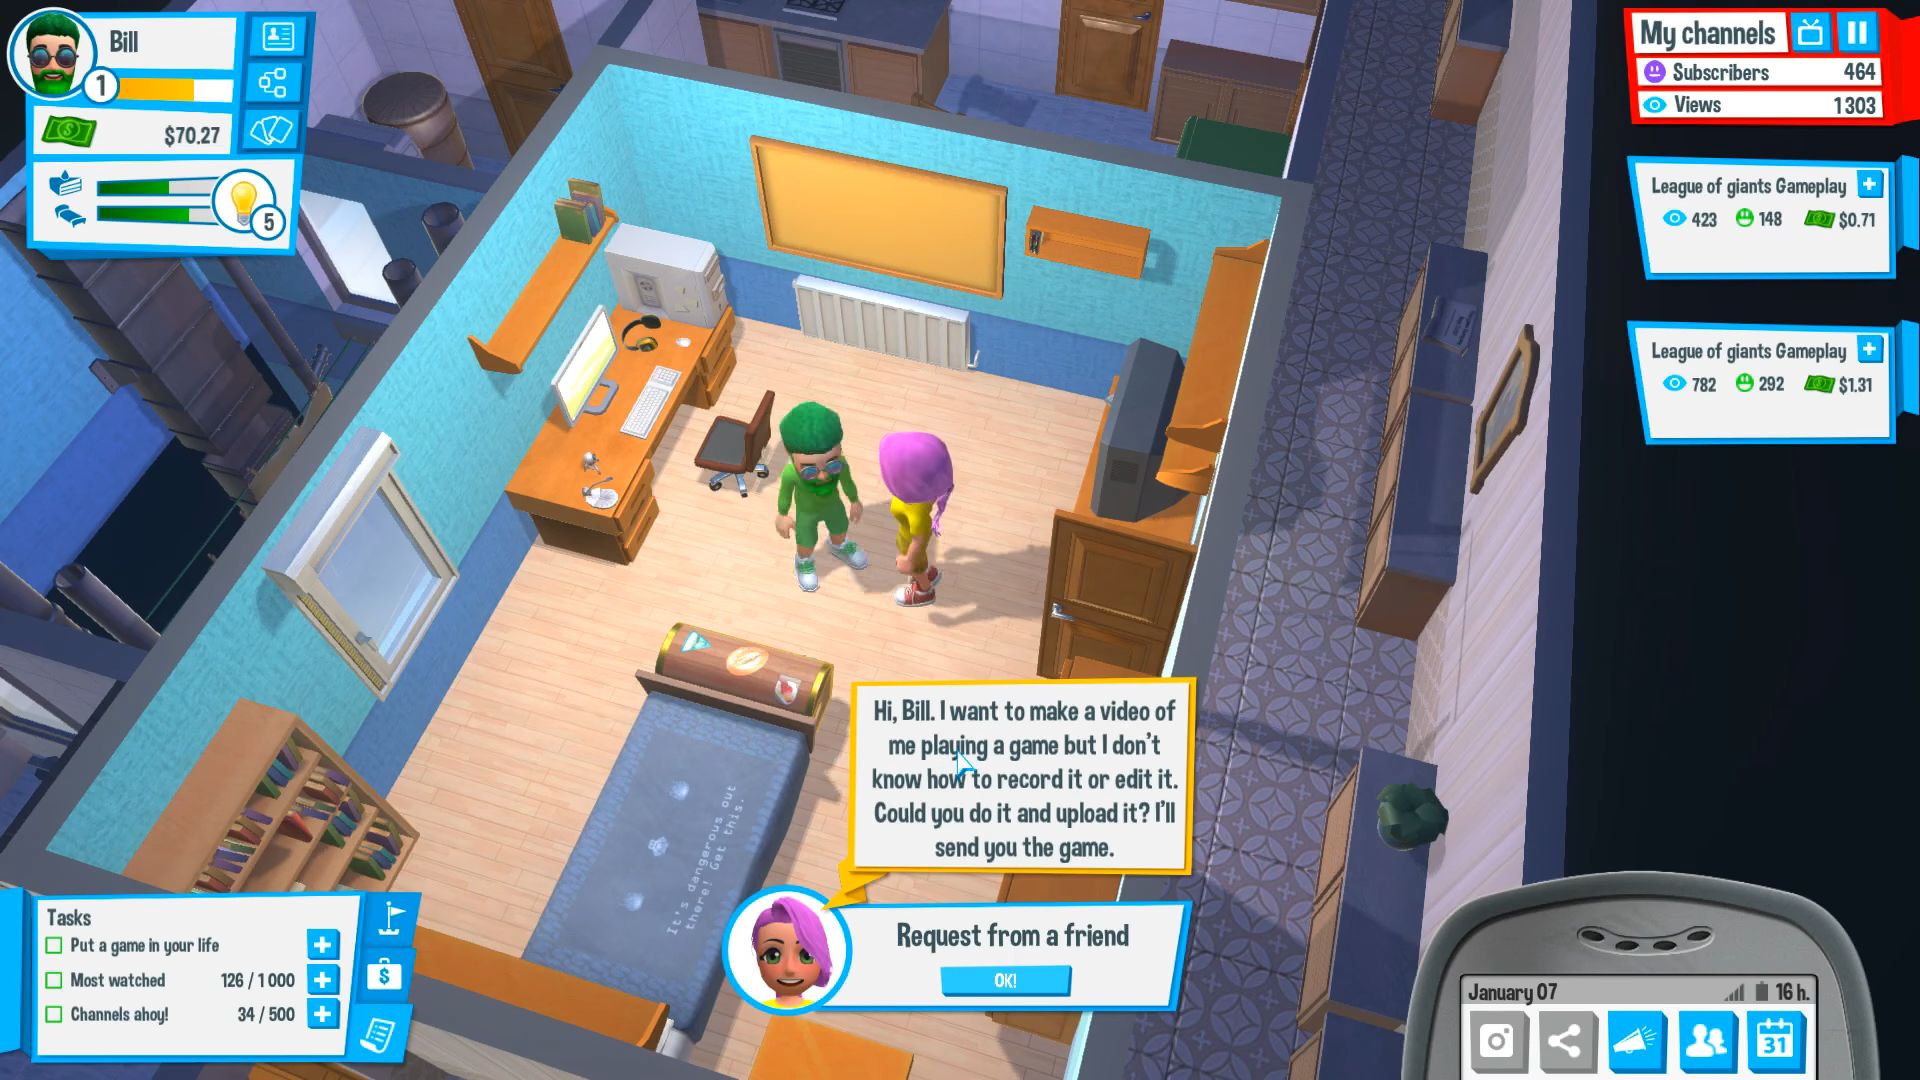 youtubers life: gaming channel apk